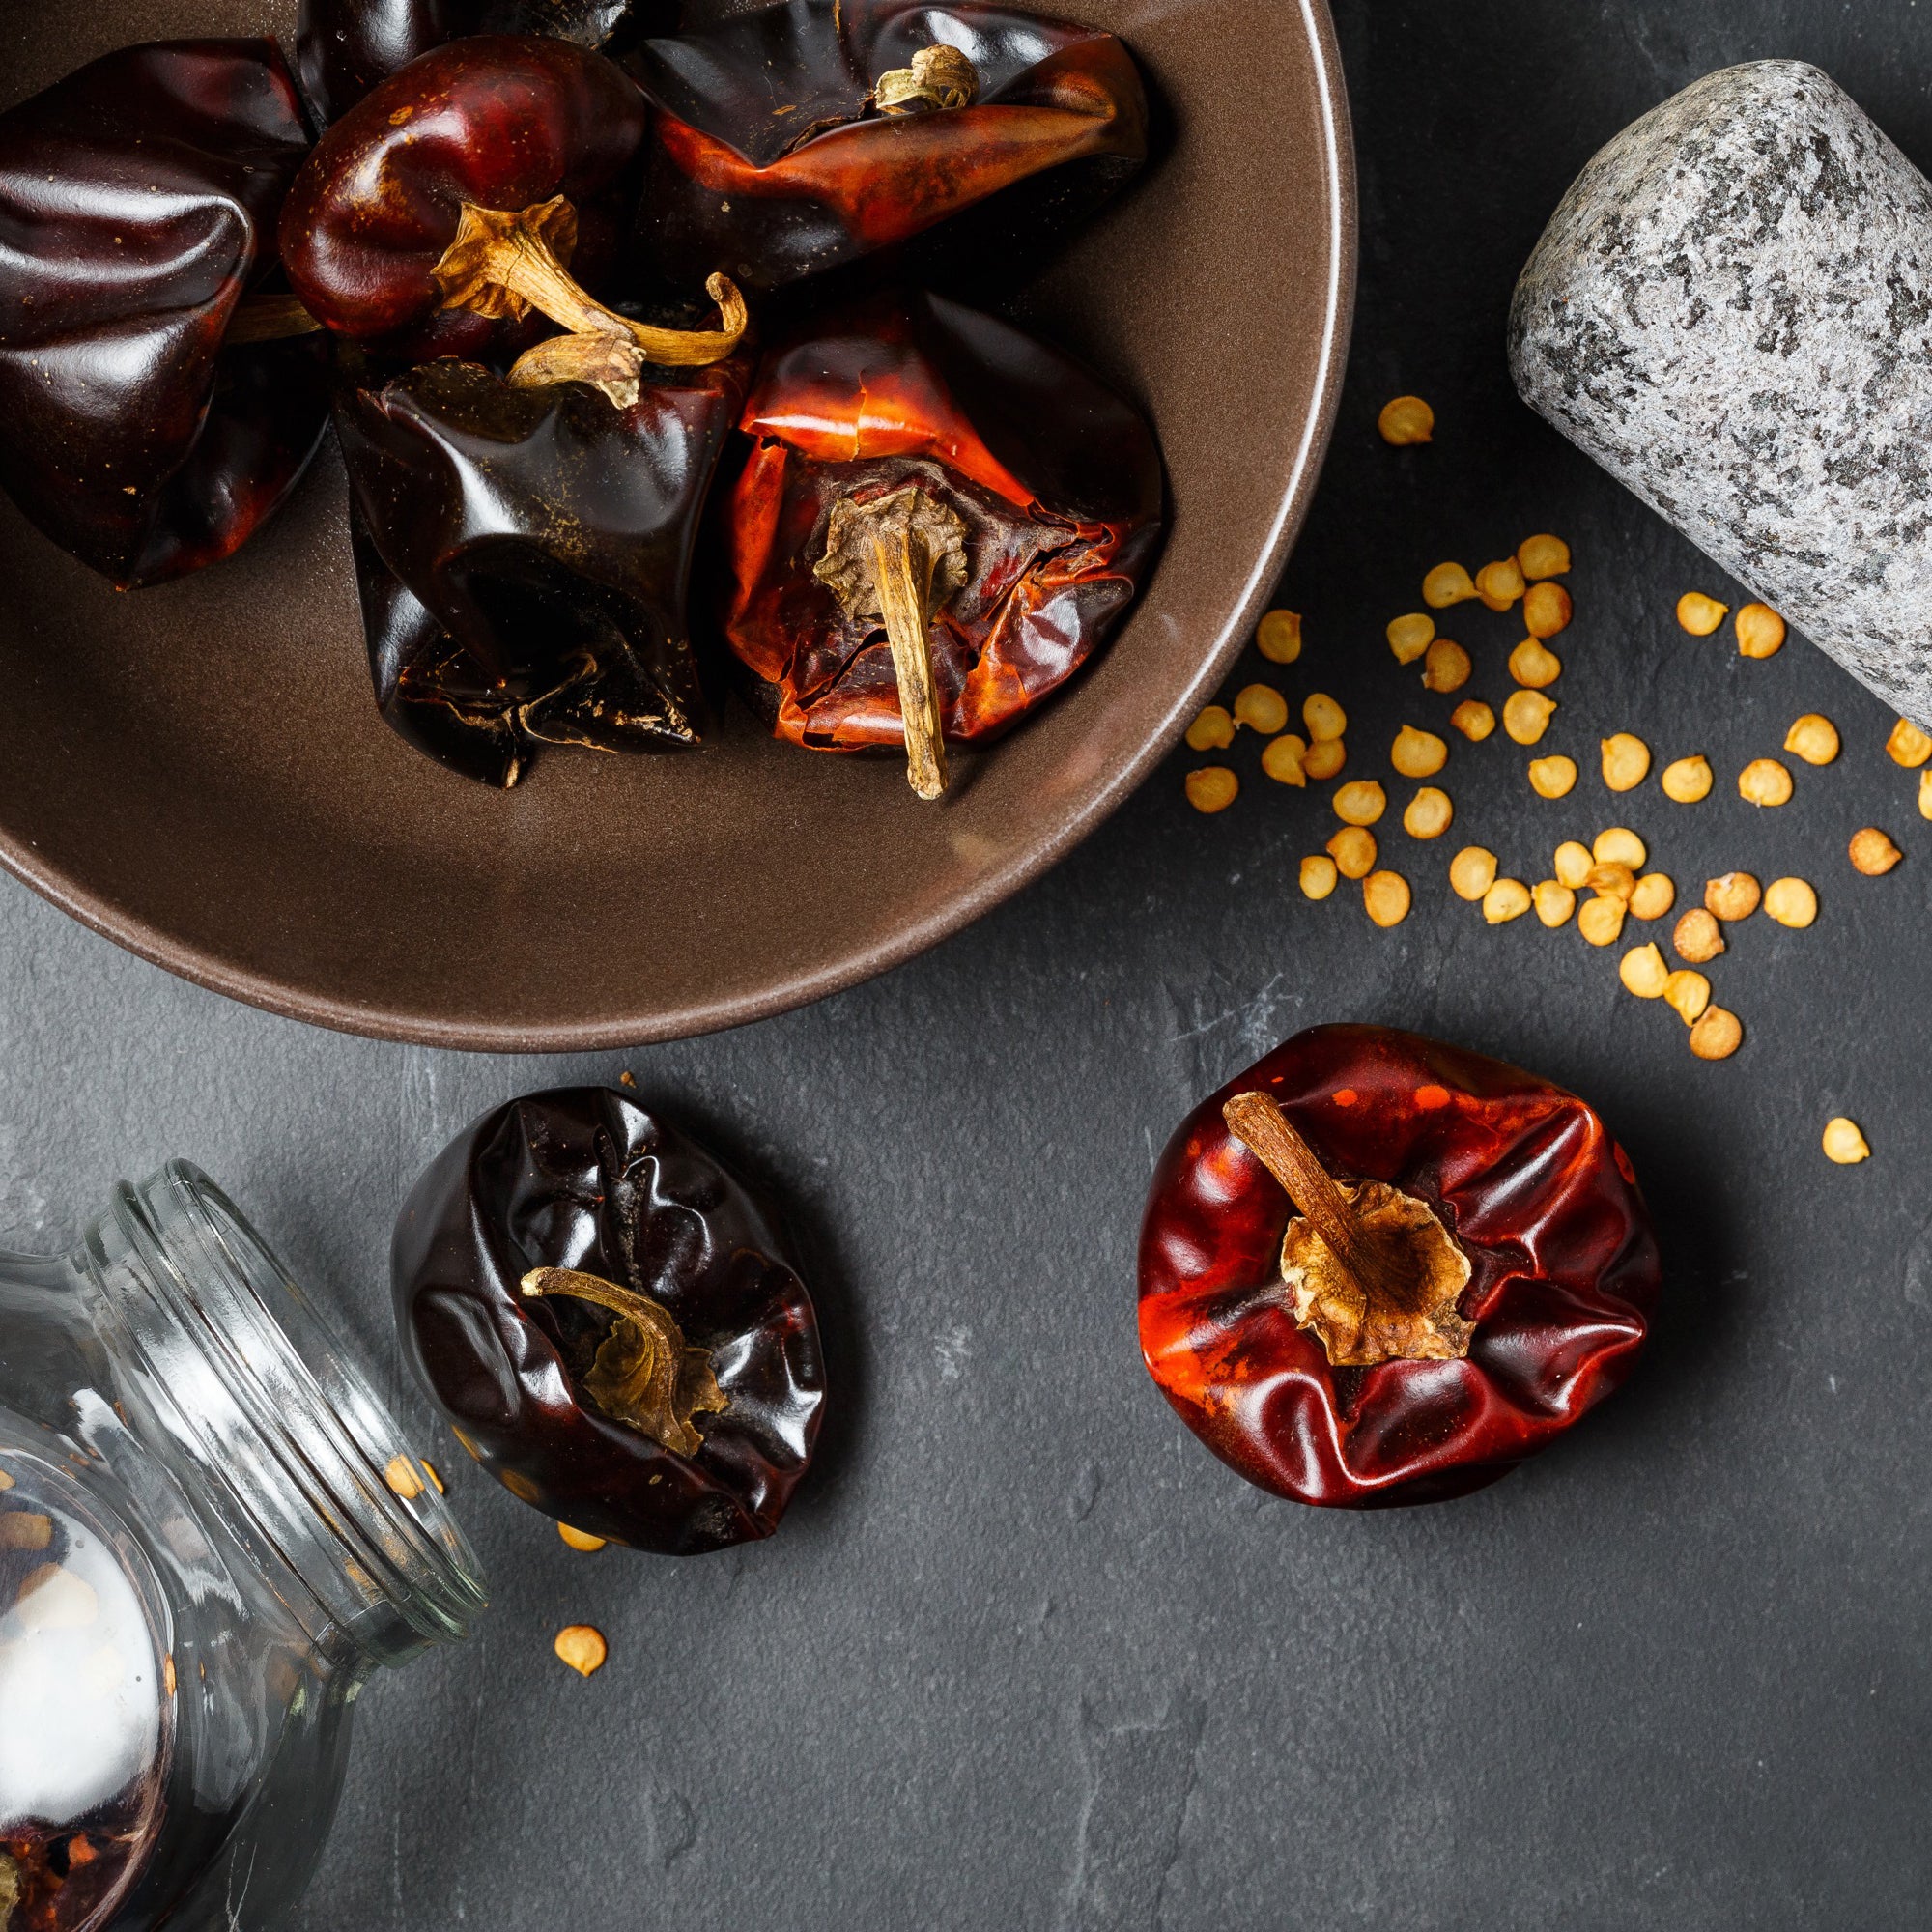 Picado Dried Cascabel Chilies